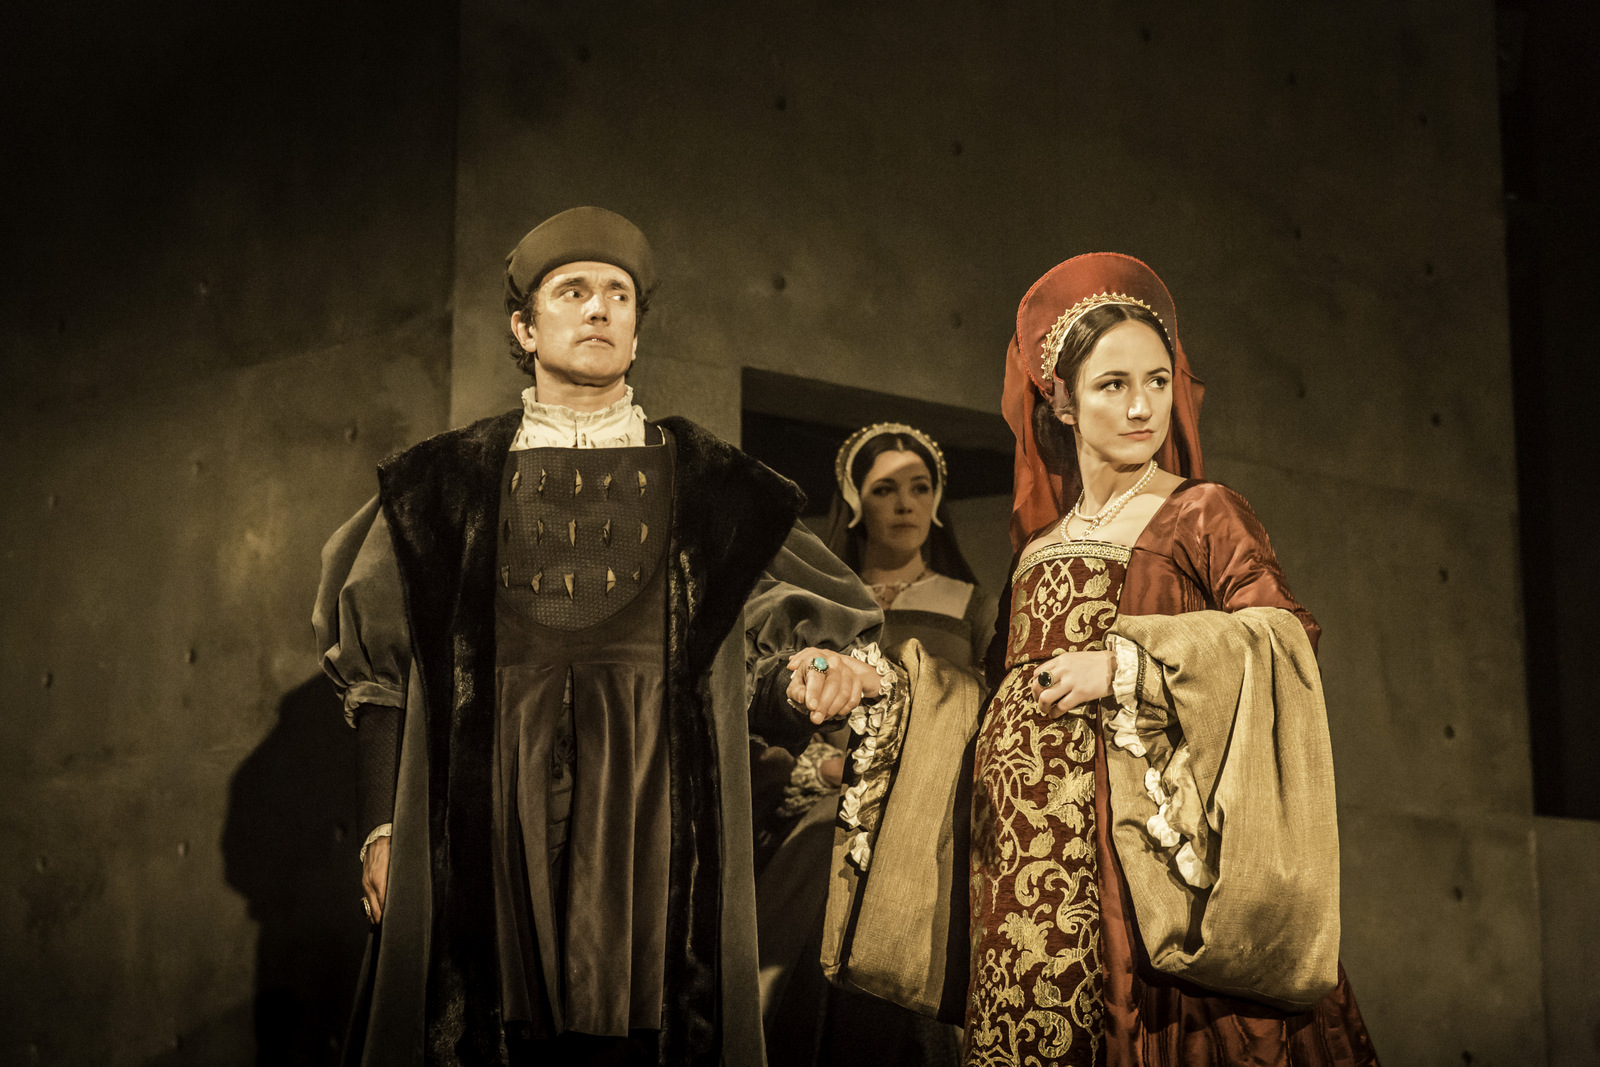 WOLF HALL by Mantel,                      , Author - Hillary Mantel, Director - Jeremy Herinn, Designer - Christopher Oram, Lighting Paule Constable, The Royal Shakespeare Company, 2014, Credit: Johan Persson/